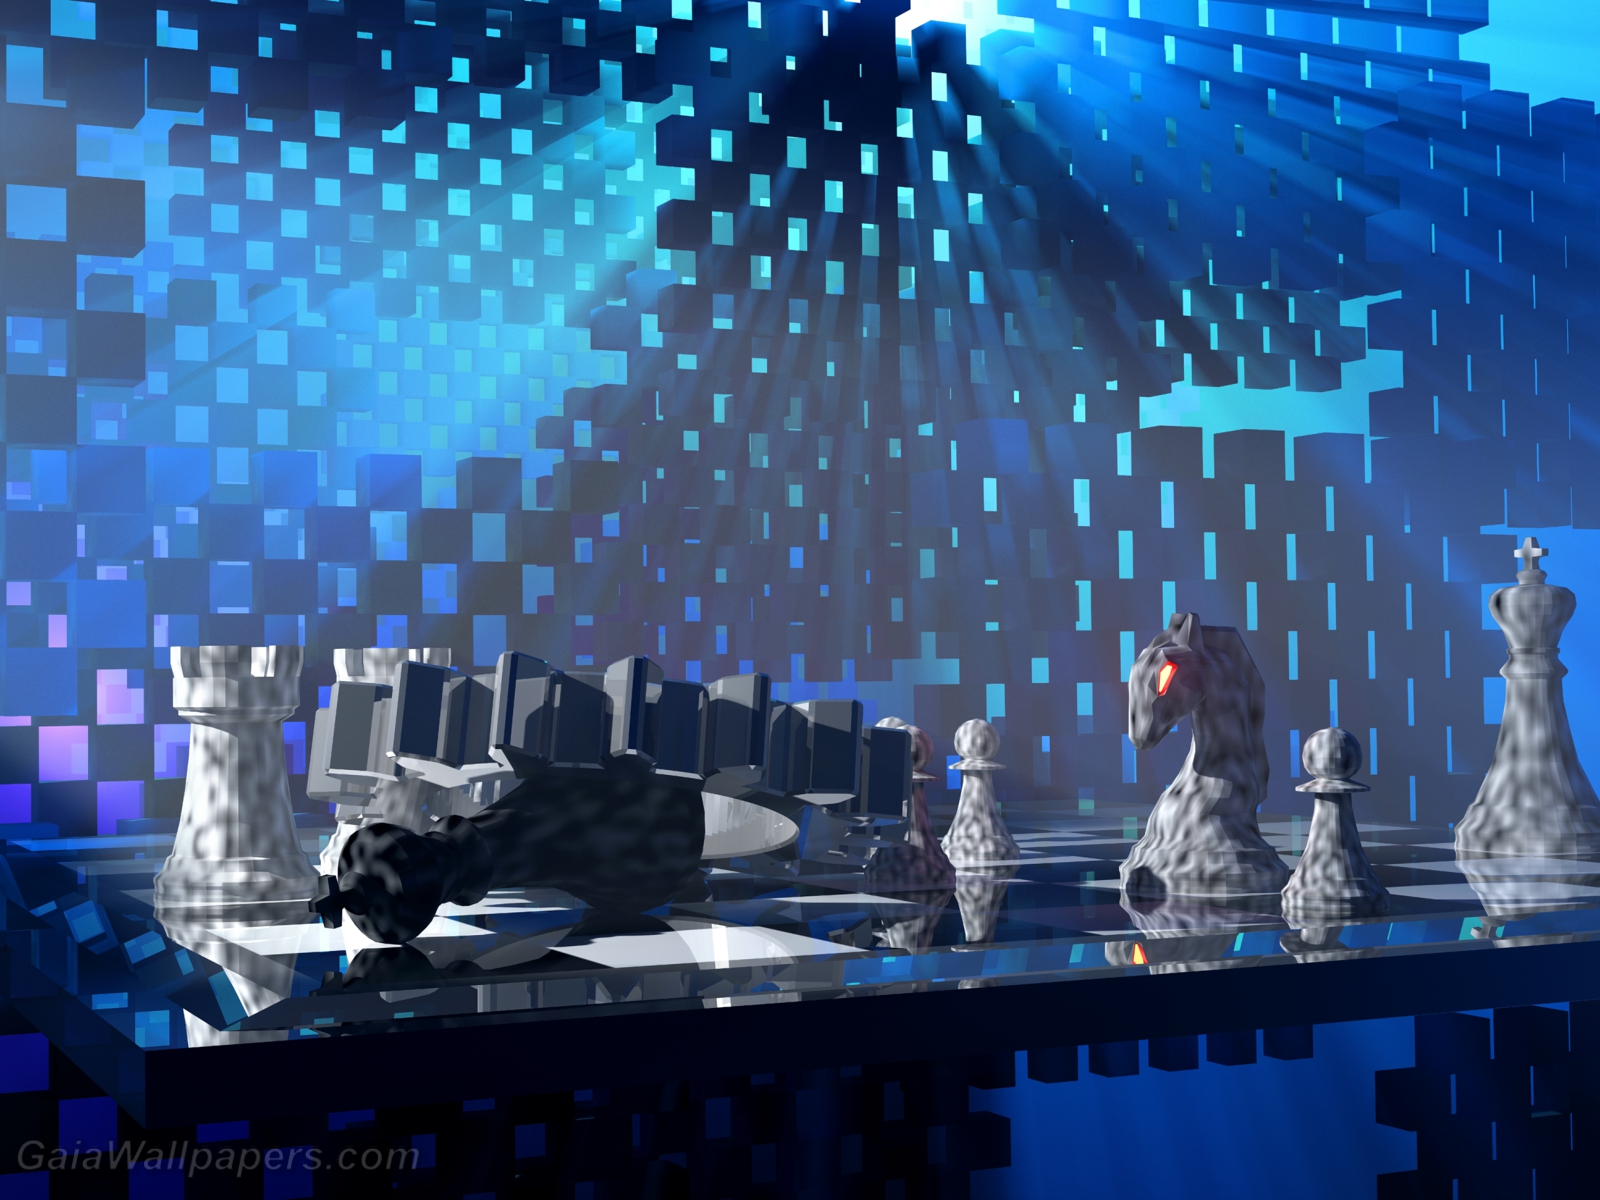 Checkmate in the virtual space - Free desktop wallpapers